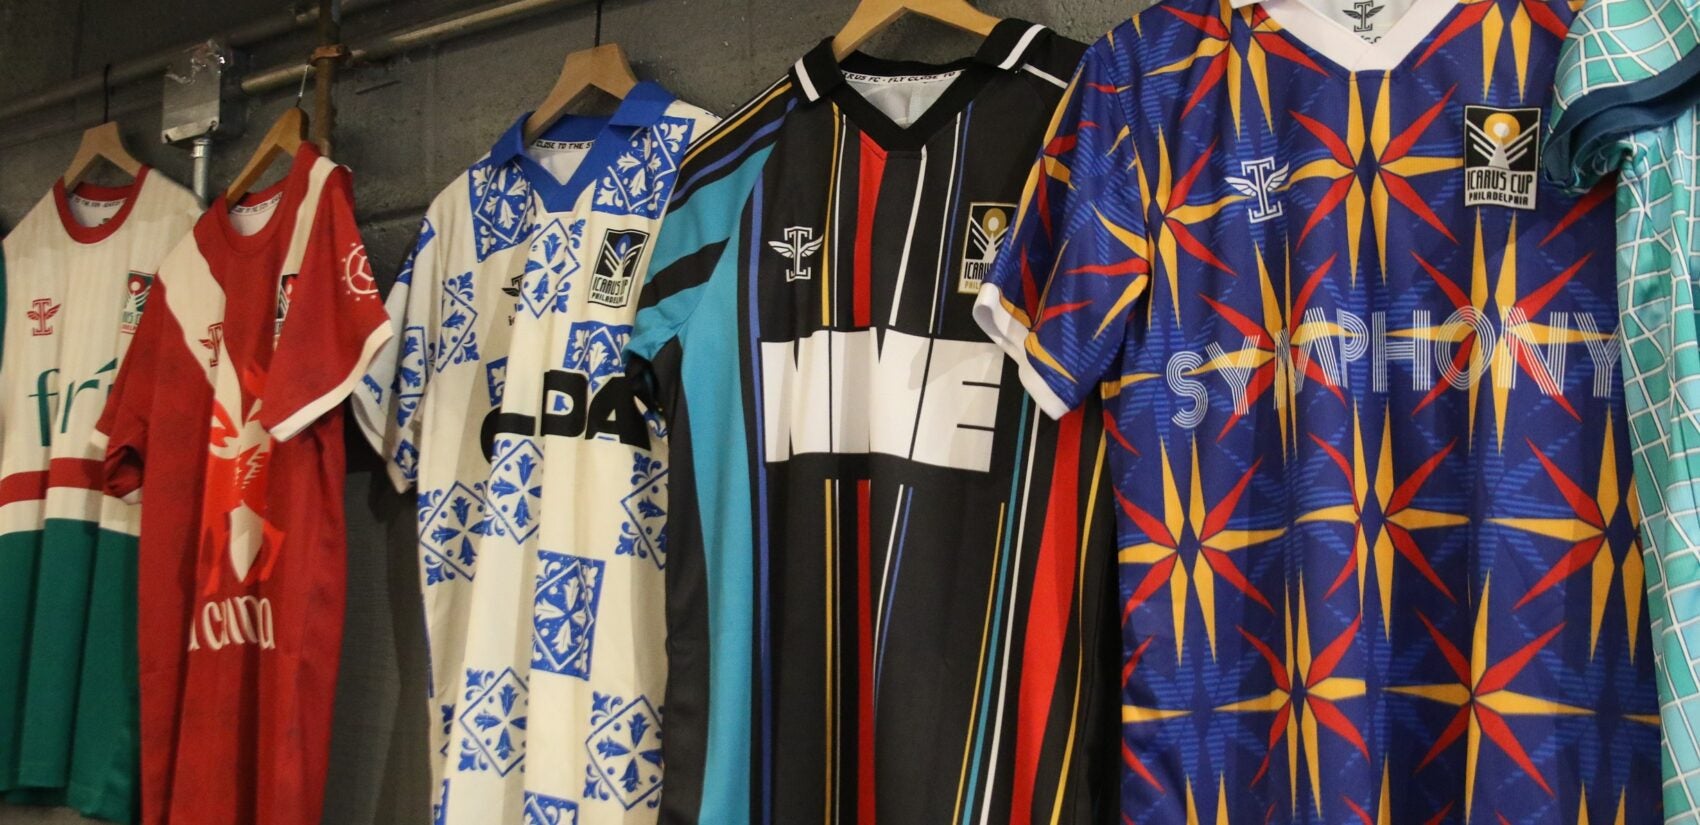 Icarus Football designed 80 special kits for this year's tournament. (Cory Sharber/WHYY)